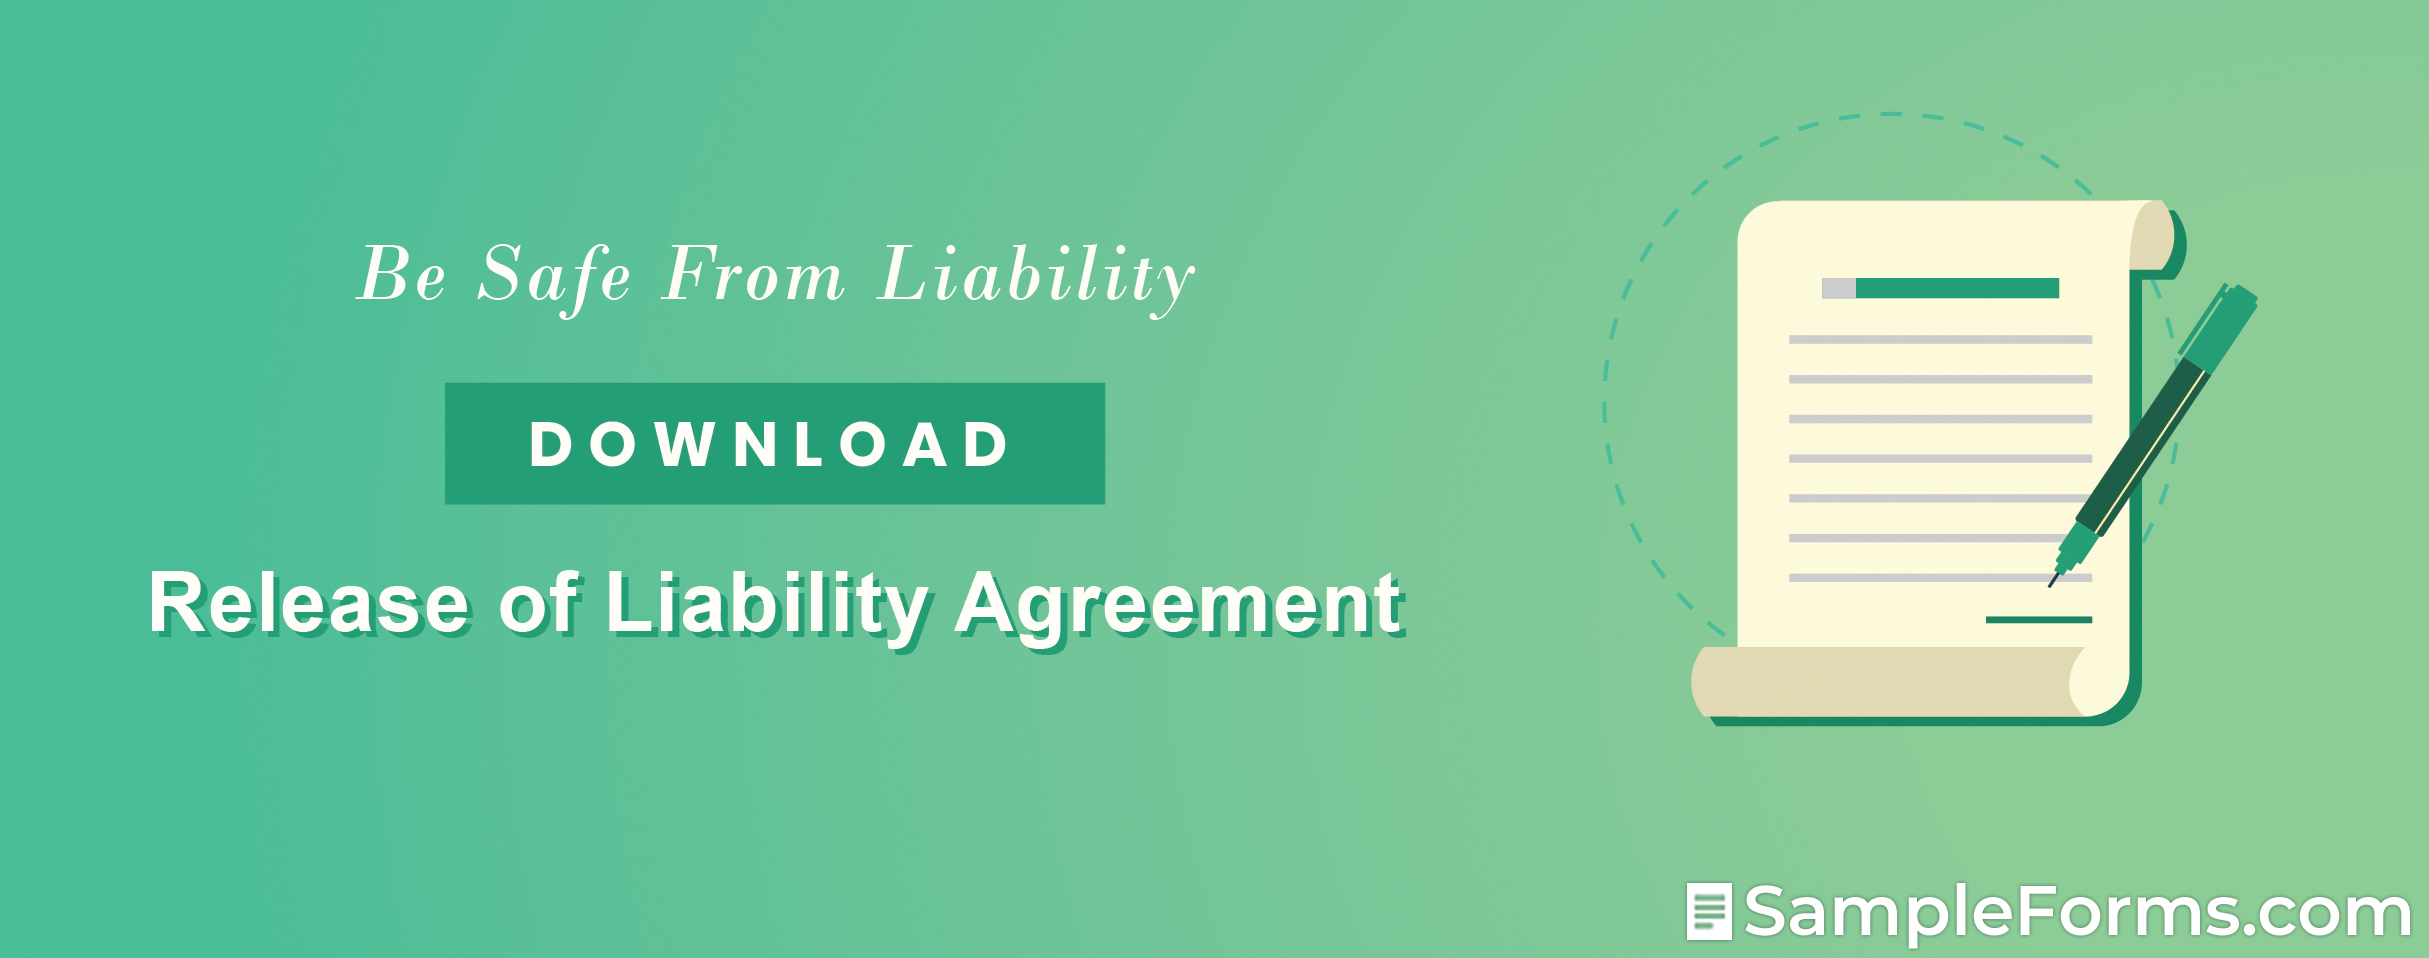 Release of Liability Agreement